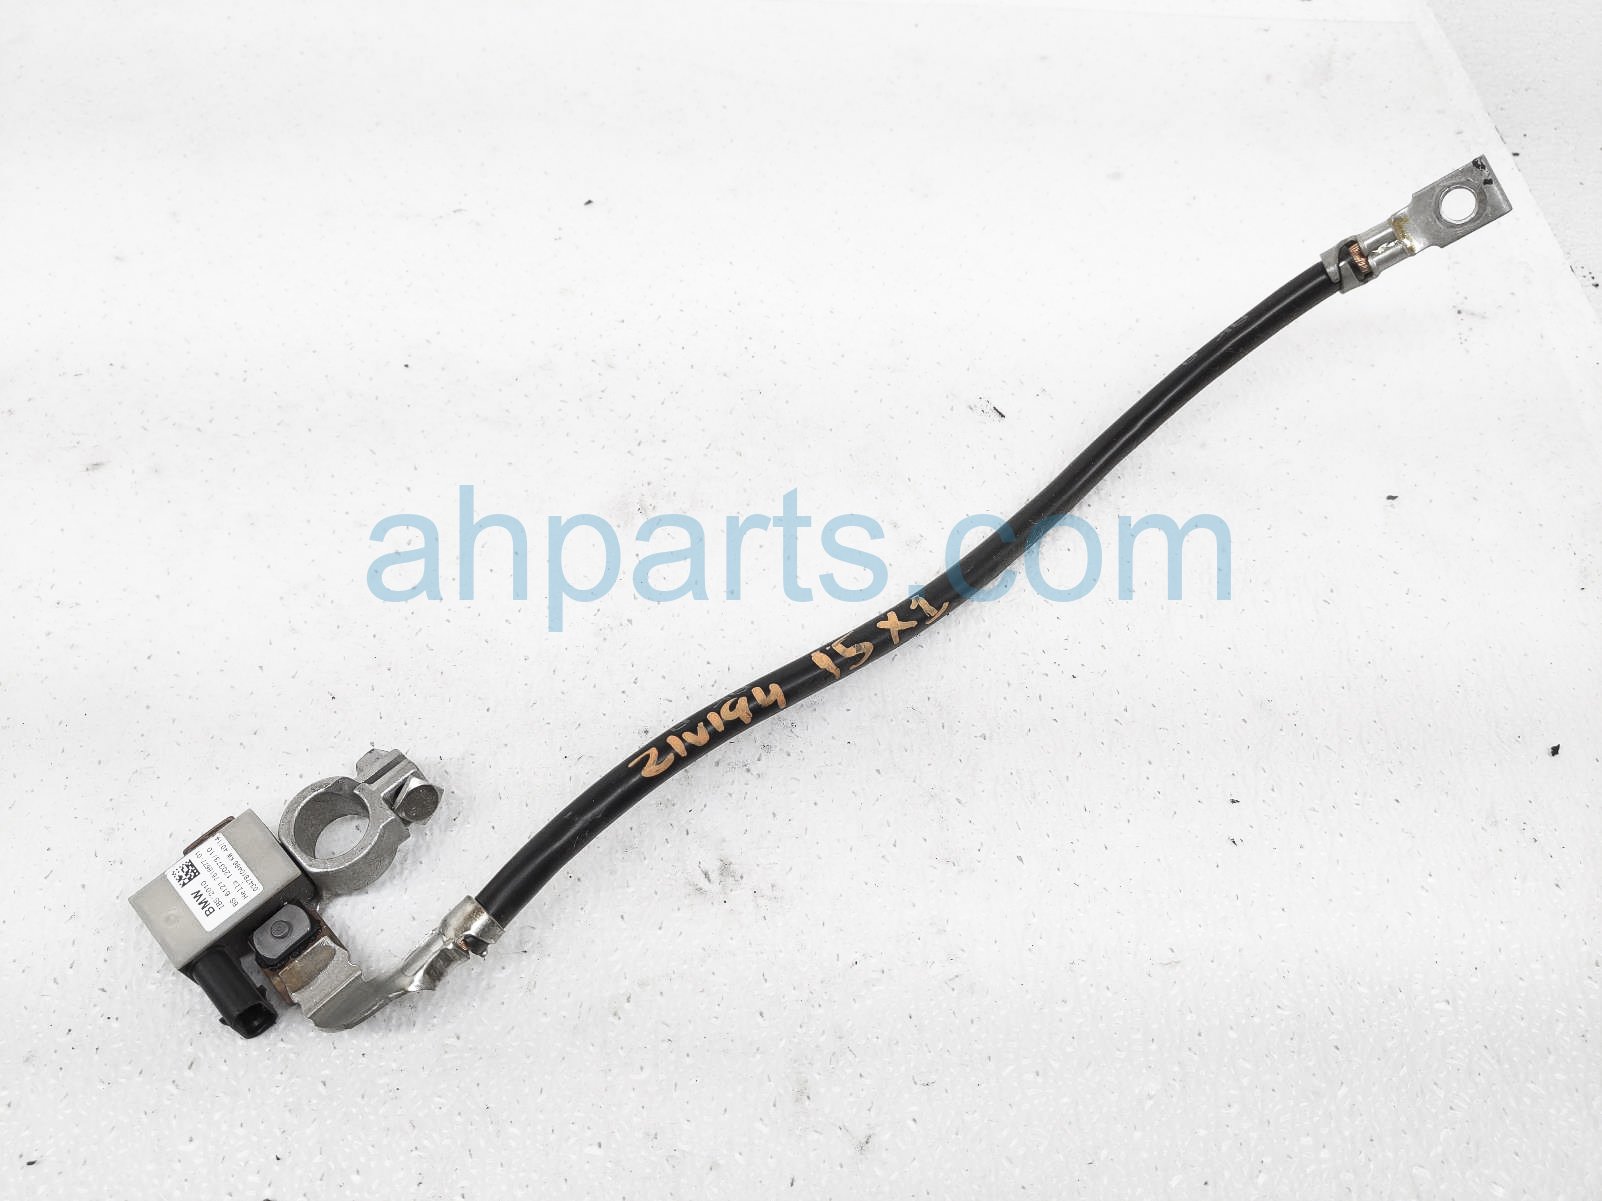 $50 BMW BATTERY NEGATIVE CABLE